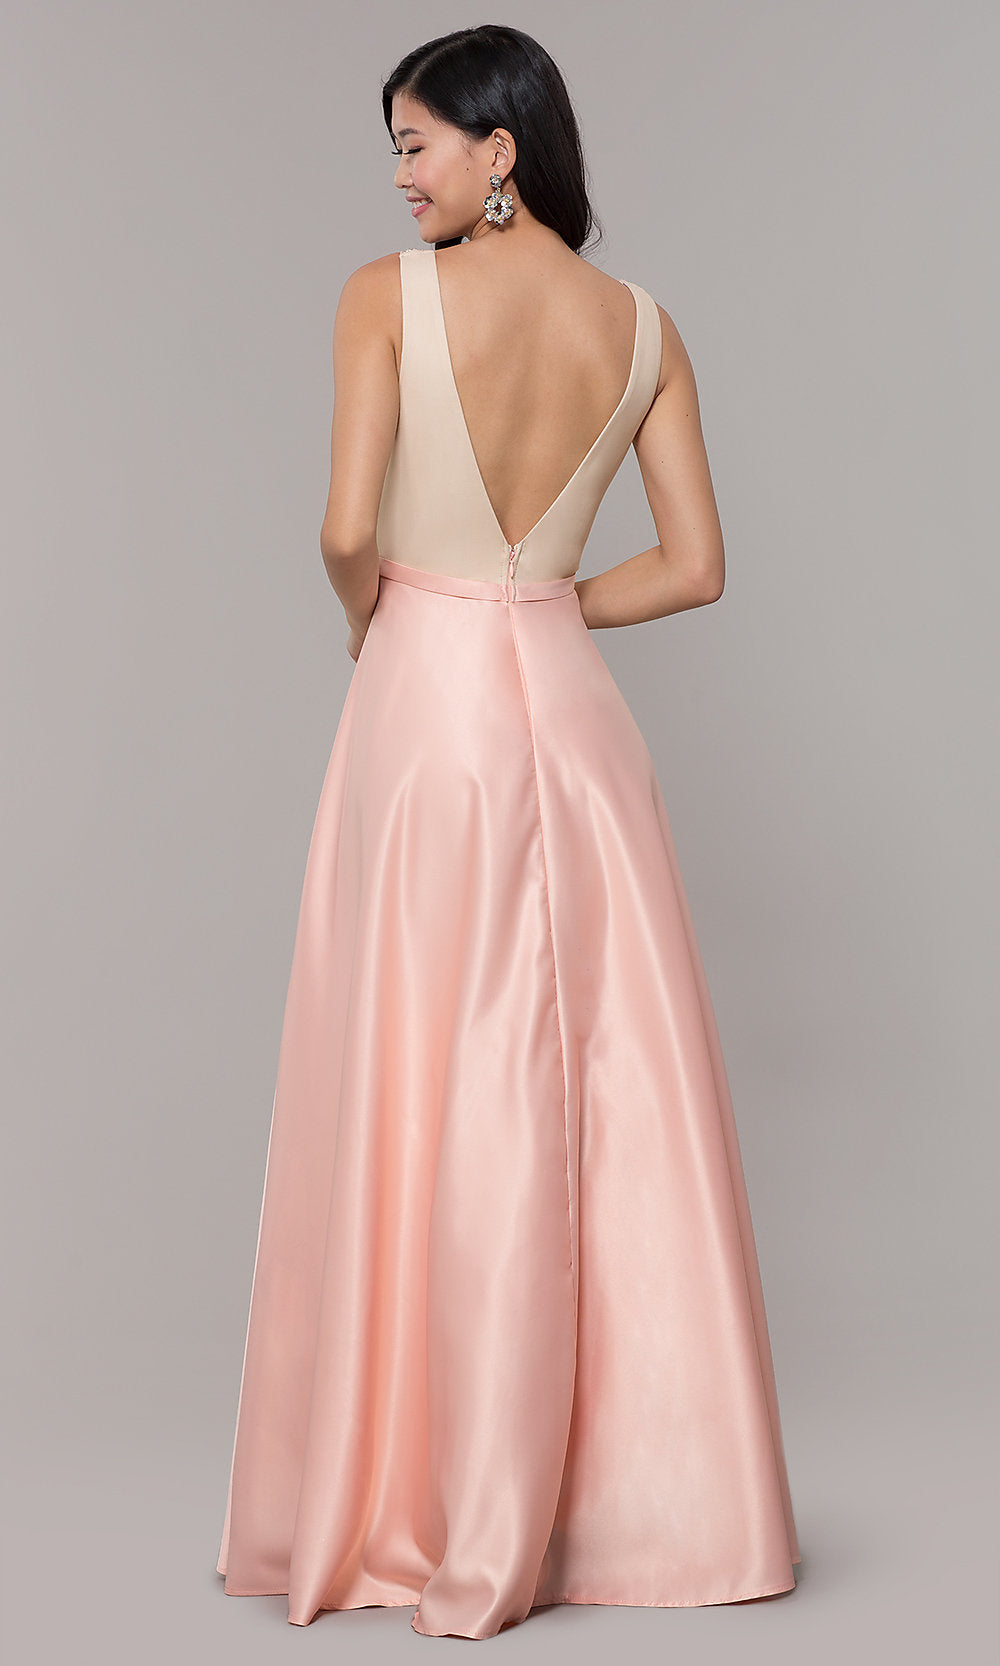  Sequin-Bodice Long Prom Dress in Blush Pink